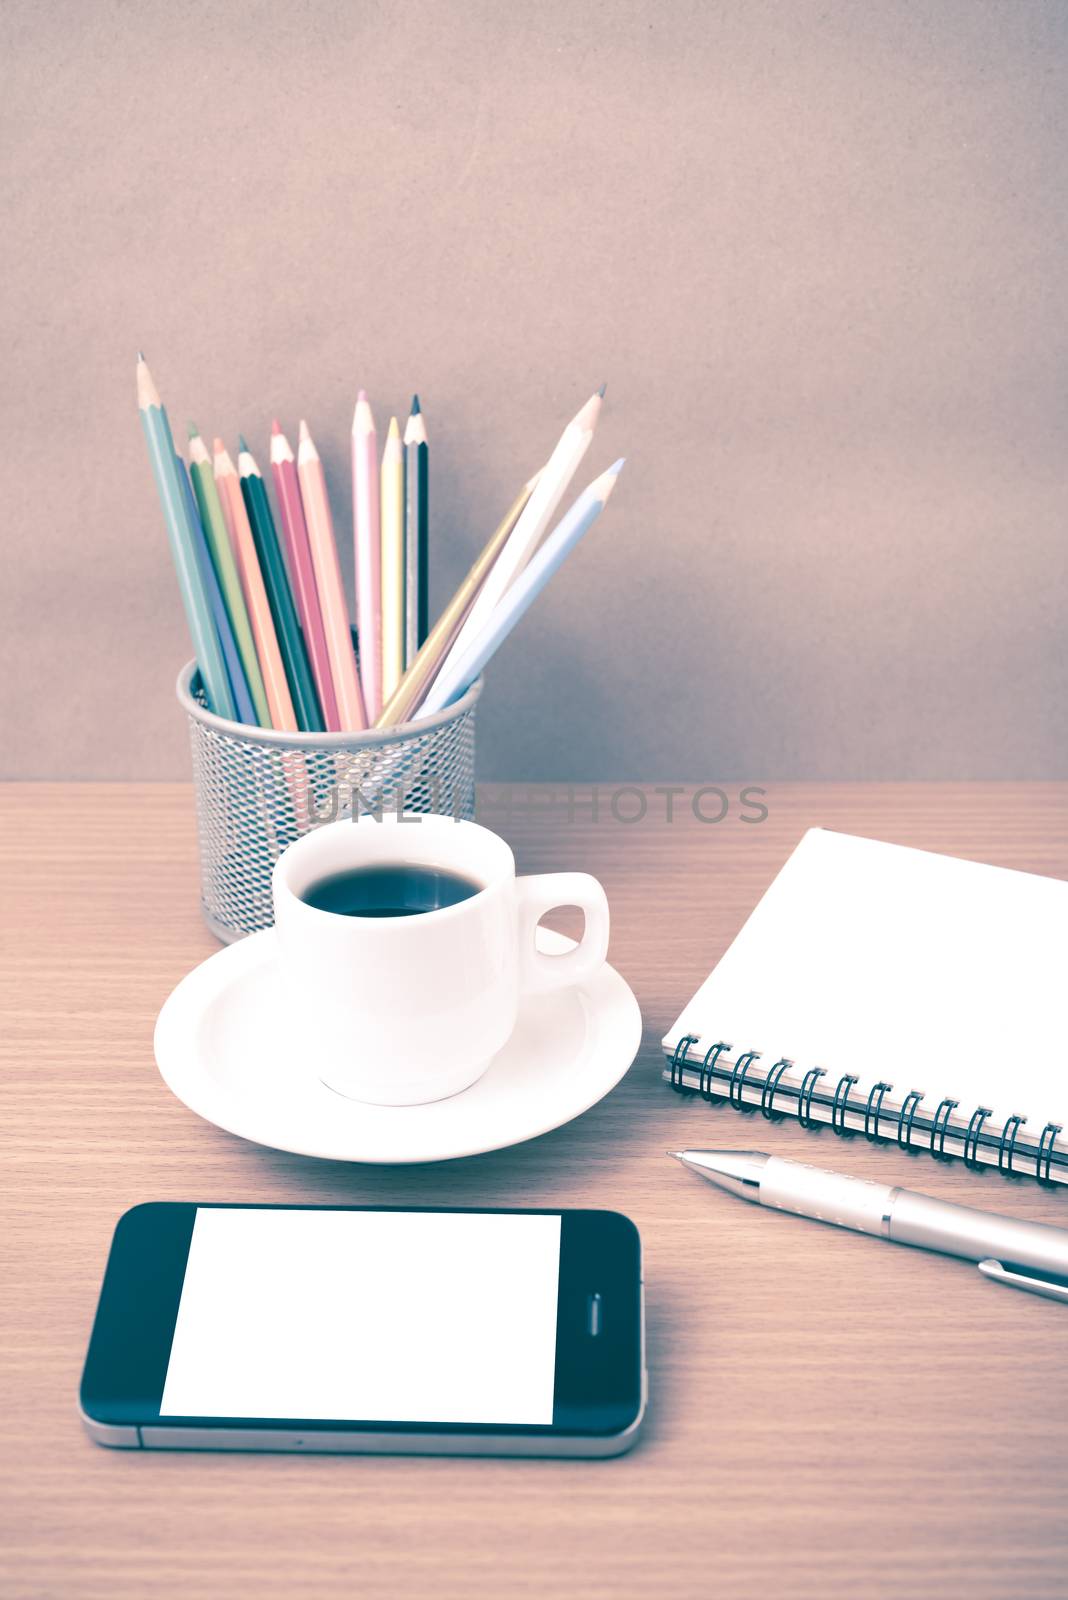 coffe,phone,notepad and color pencil on wood table background vintage style